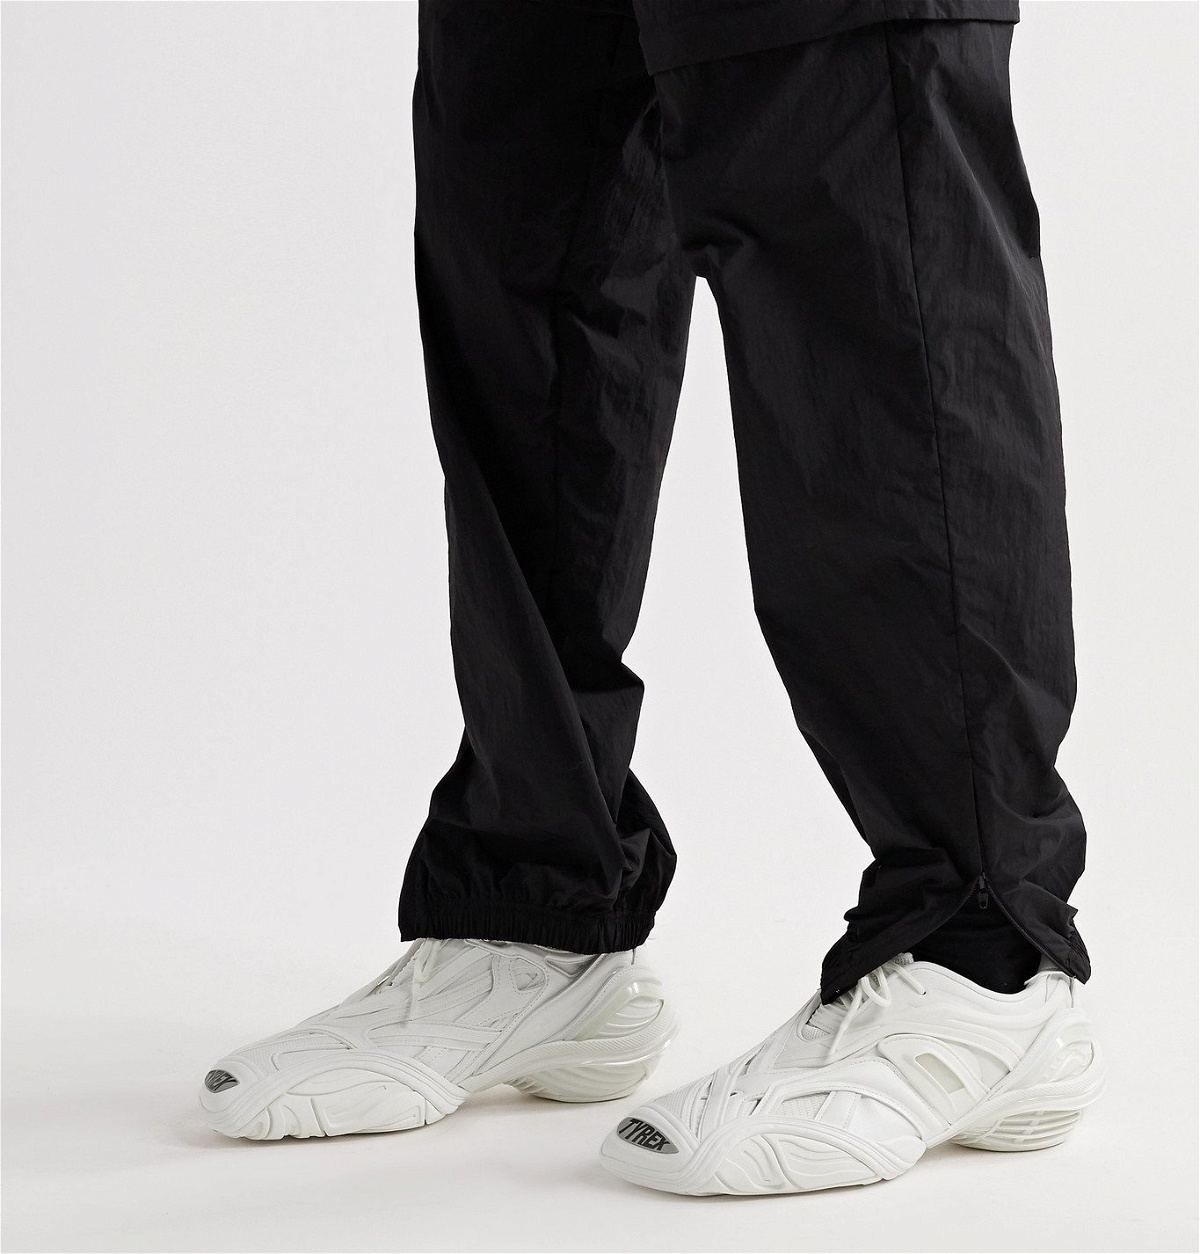 Balenciaga - Tyrex Rubber, Mesh and Faux Leather Sneakers - White ...